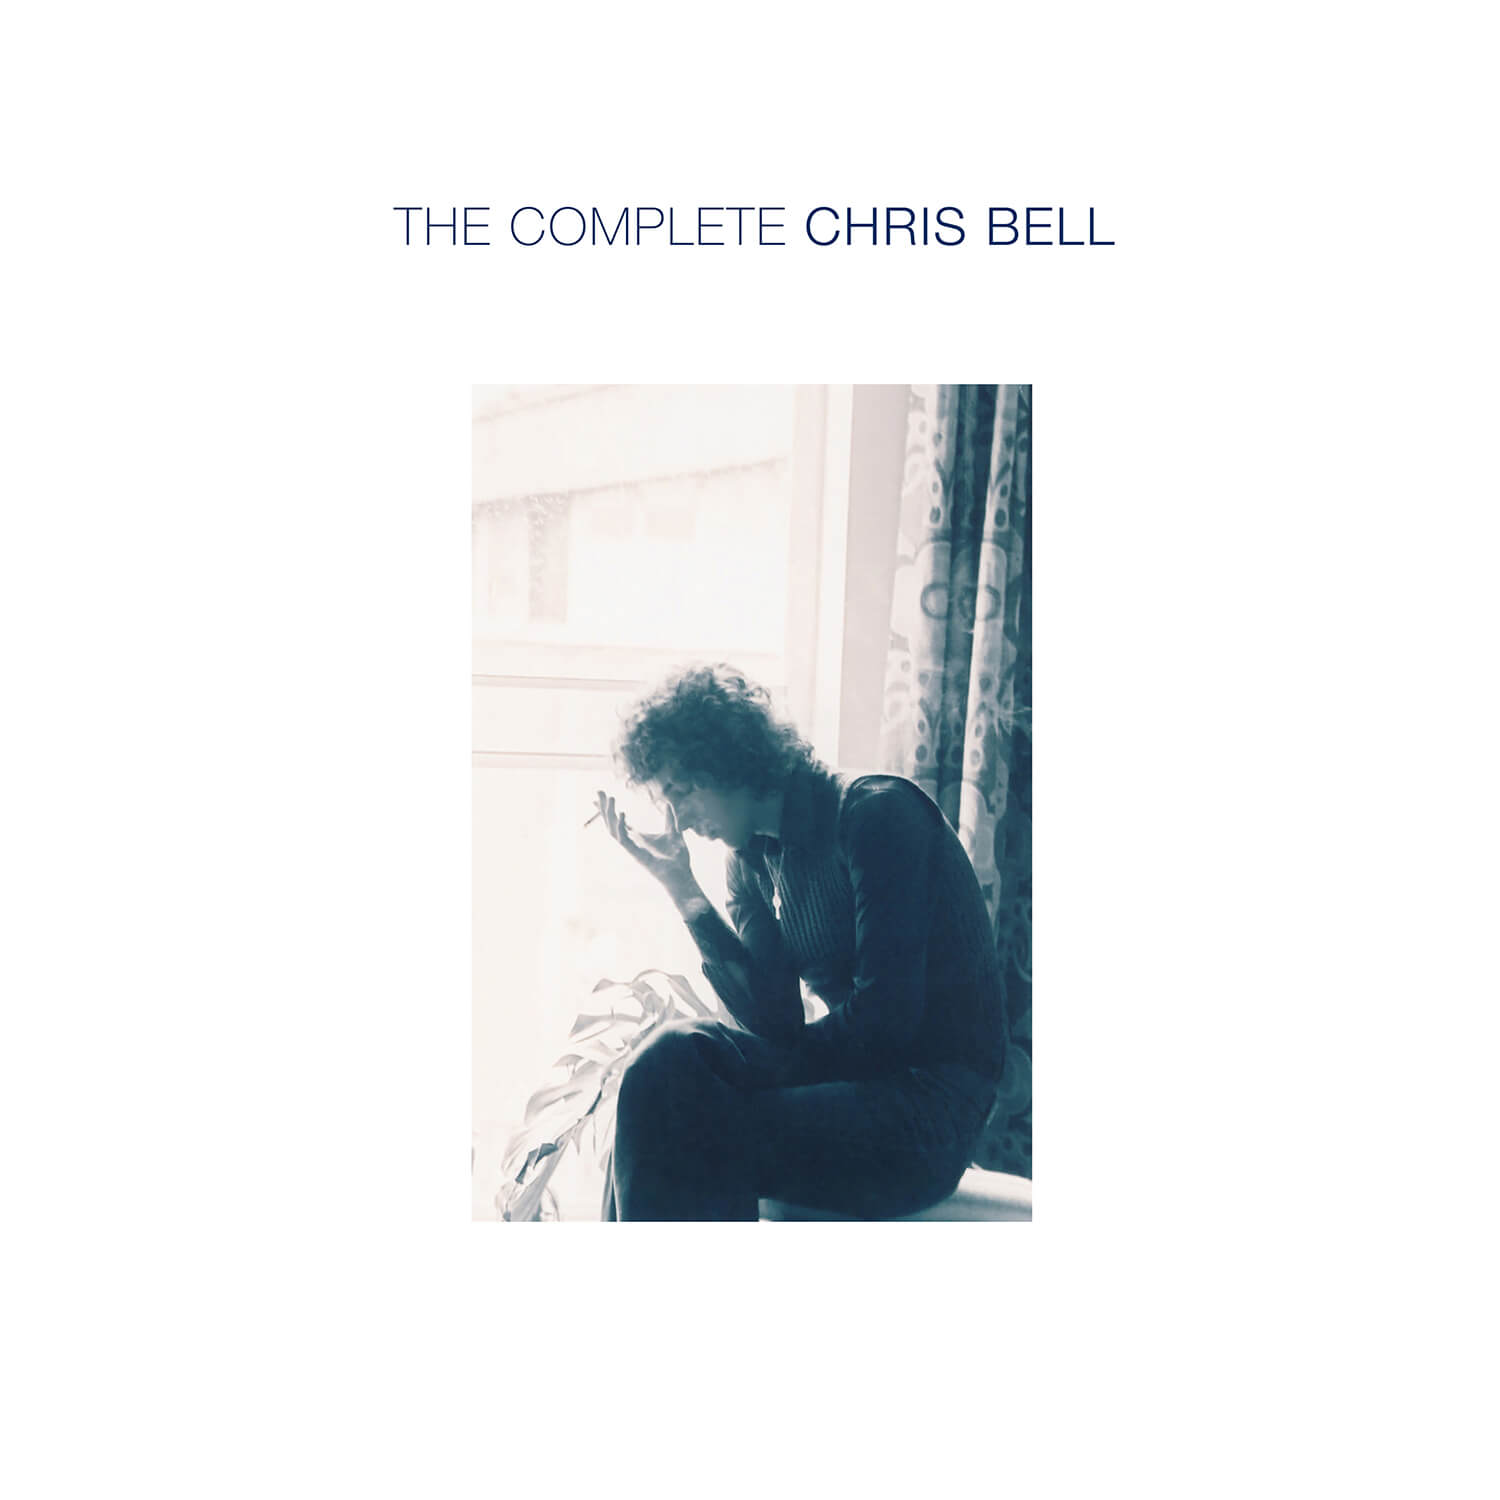 The Complete Chris Bell